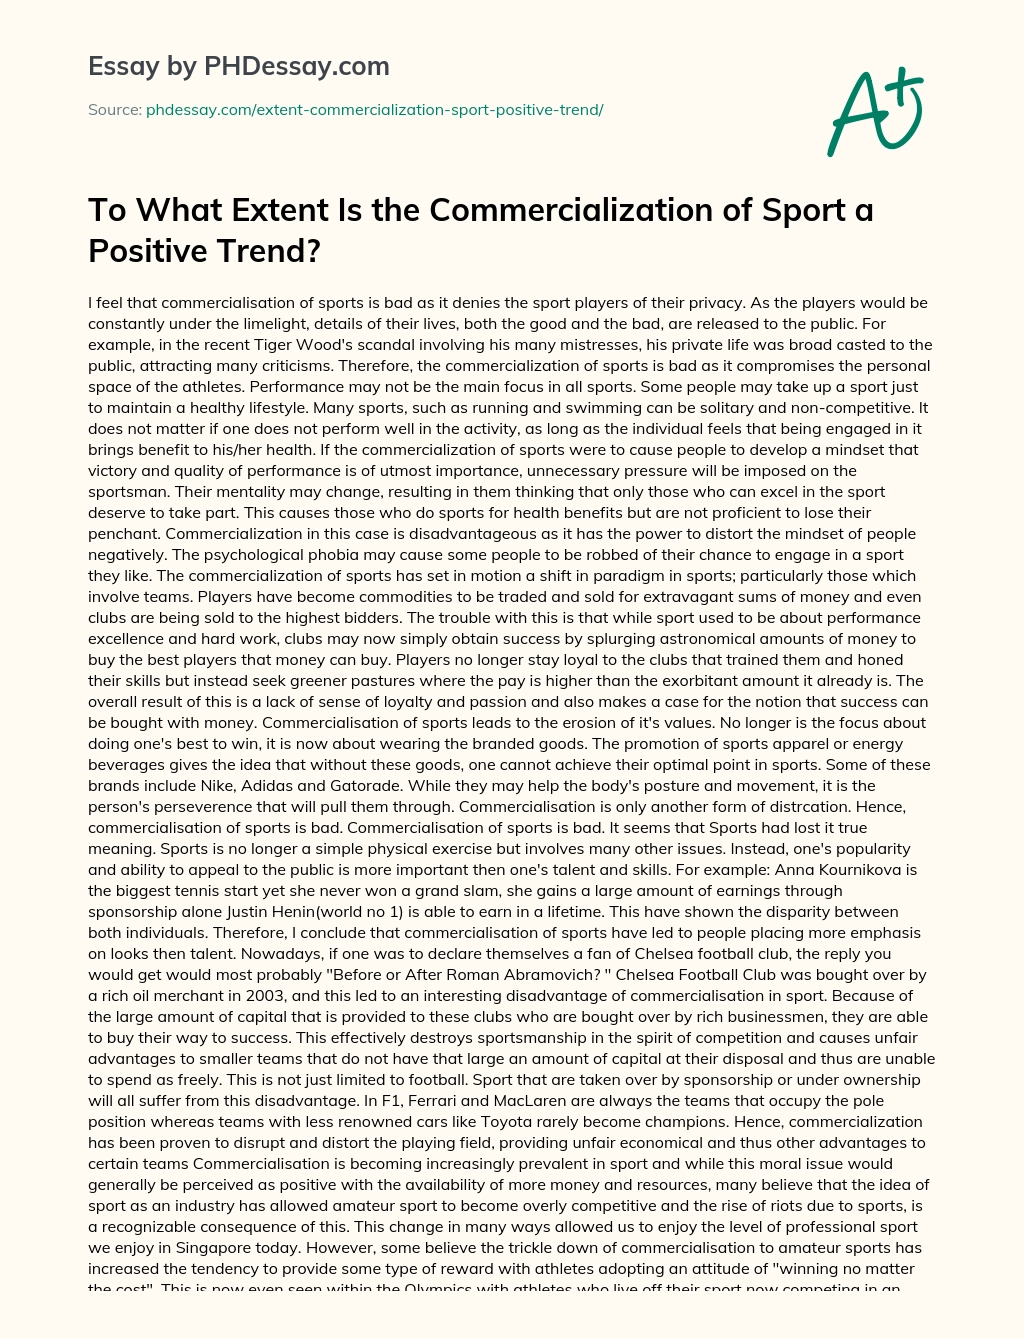 To What Extent Is the Commercialization of Sport a Positive Trend? essay